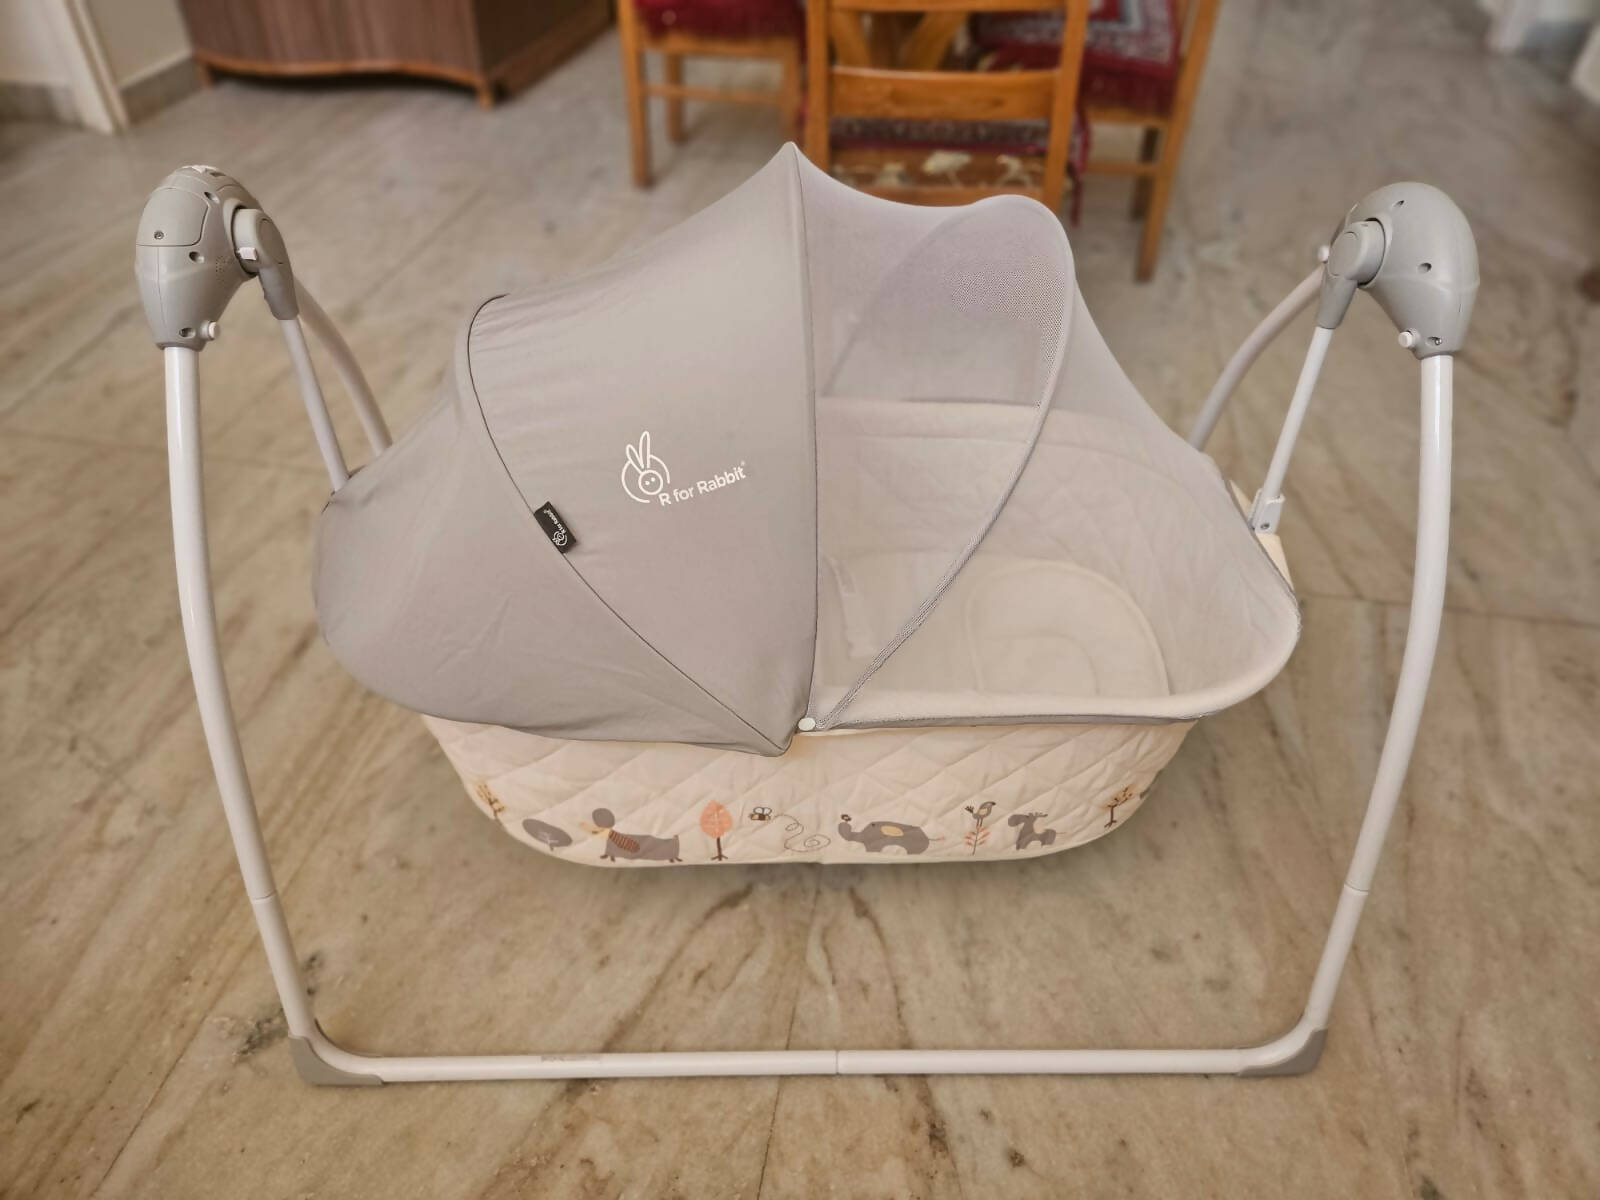 R FOR RABBIT Lullabies Automatic Swing Baby Cradle with Remote Control & Mosquito Net - PyaraBaby